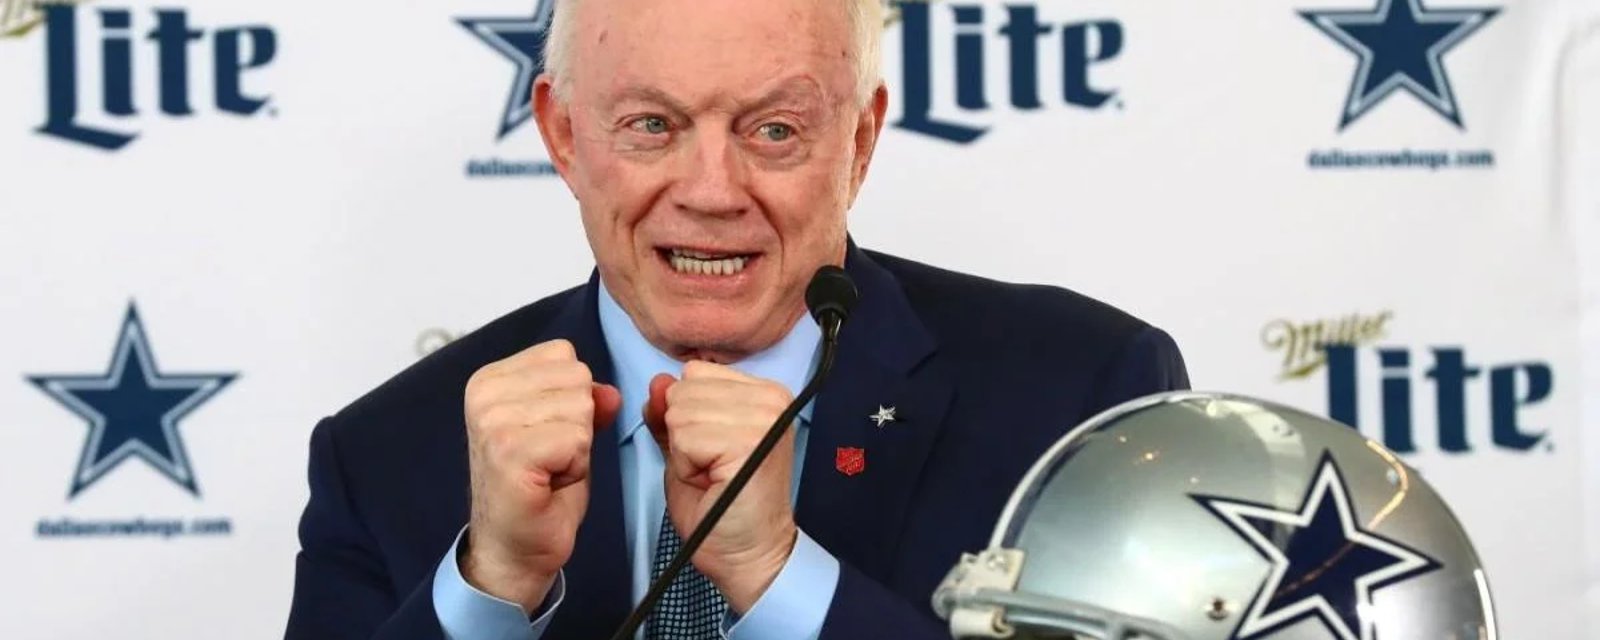 Jerry Jones shocks fans with NSFW comment